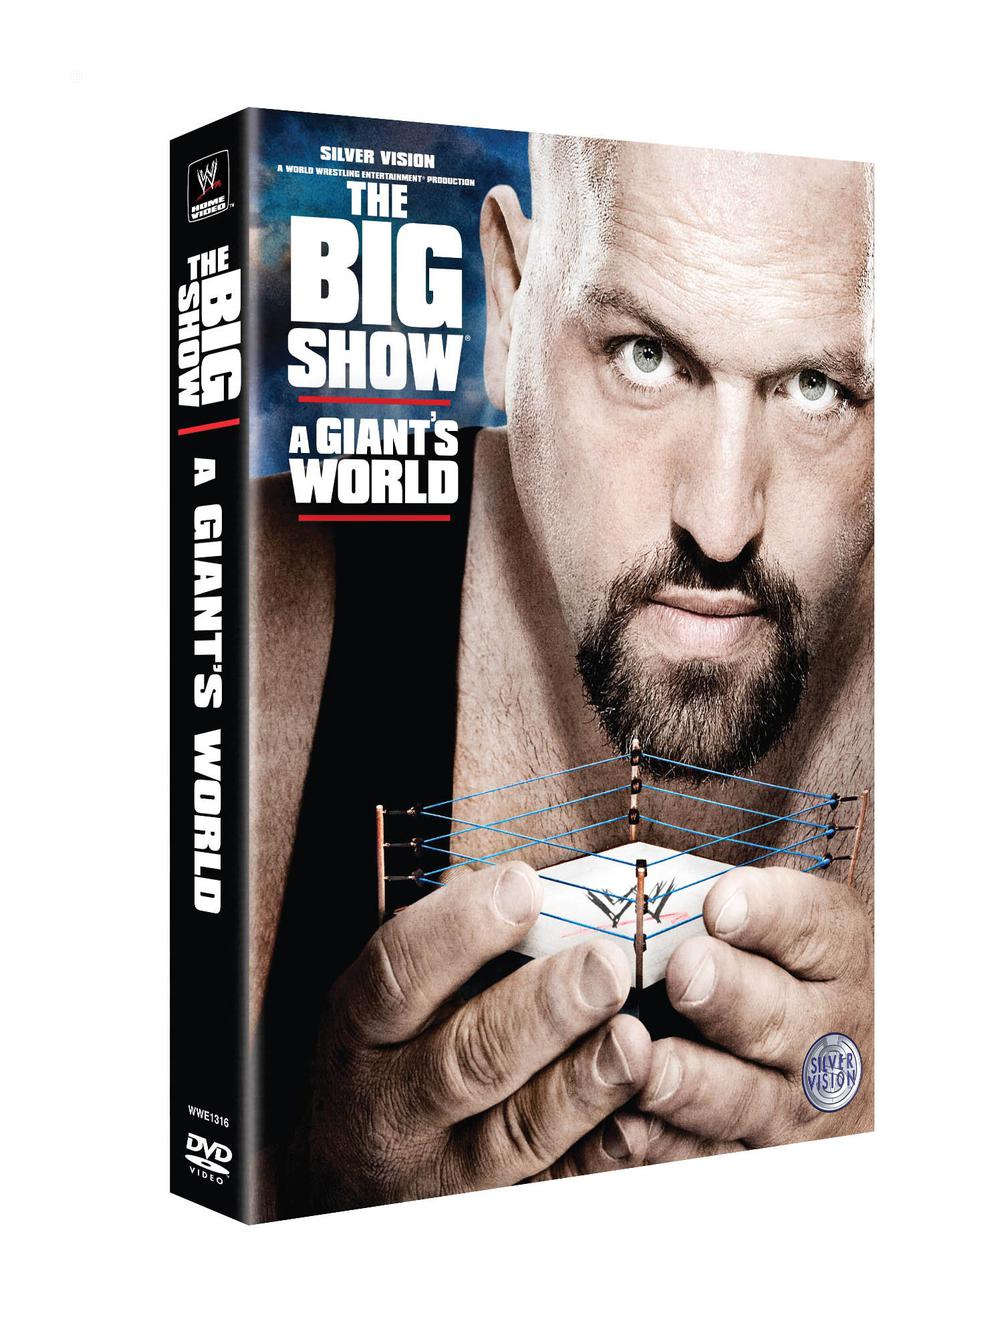 THE BIG SHOW, A GIANT'S WORLD